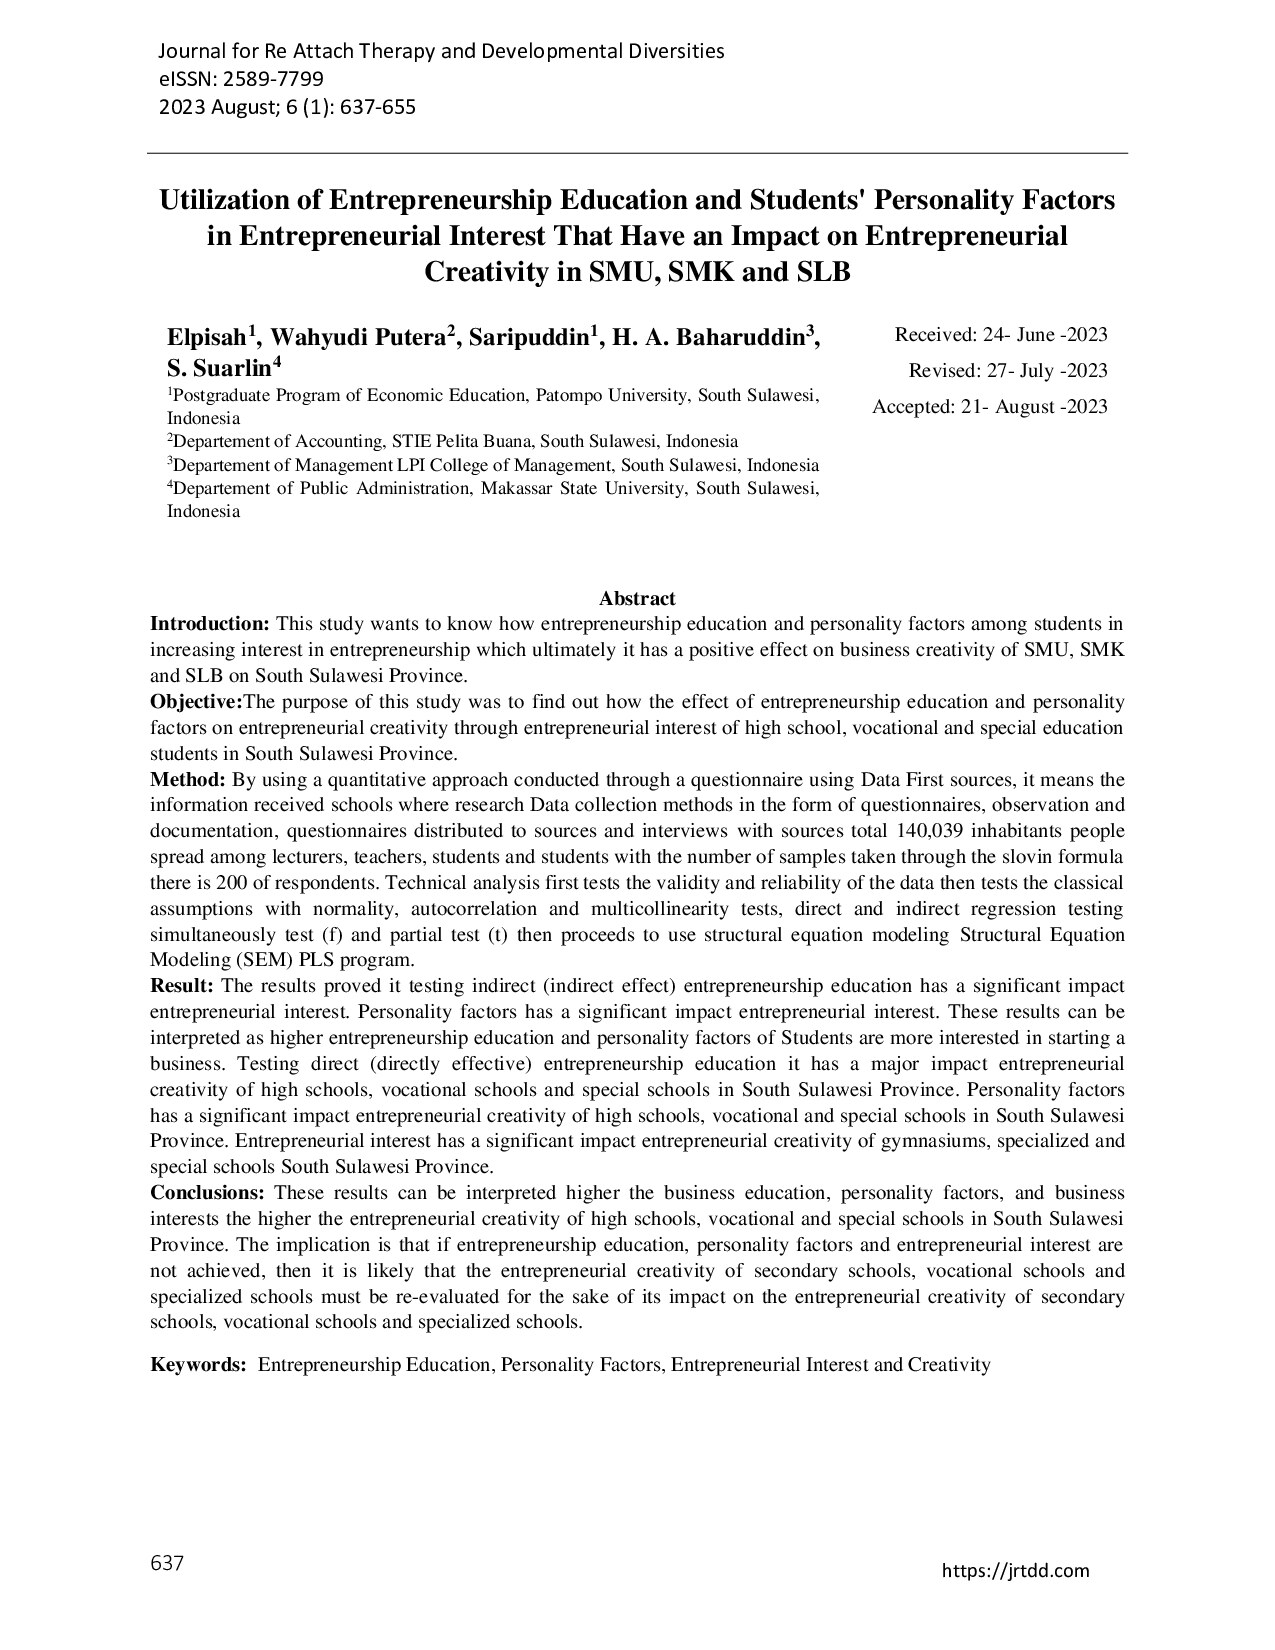 Utilization of Entrepreneurship Education and Students' Personality Factors in Entrepreneurial Interest That Have an Impact on Entrepreneurial Creativity in SMU, SMK and SLB